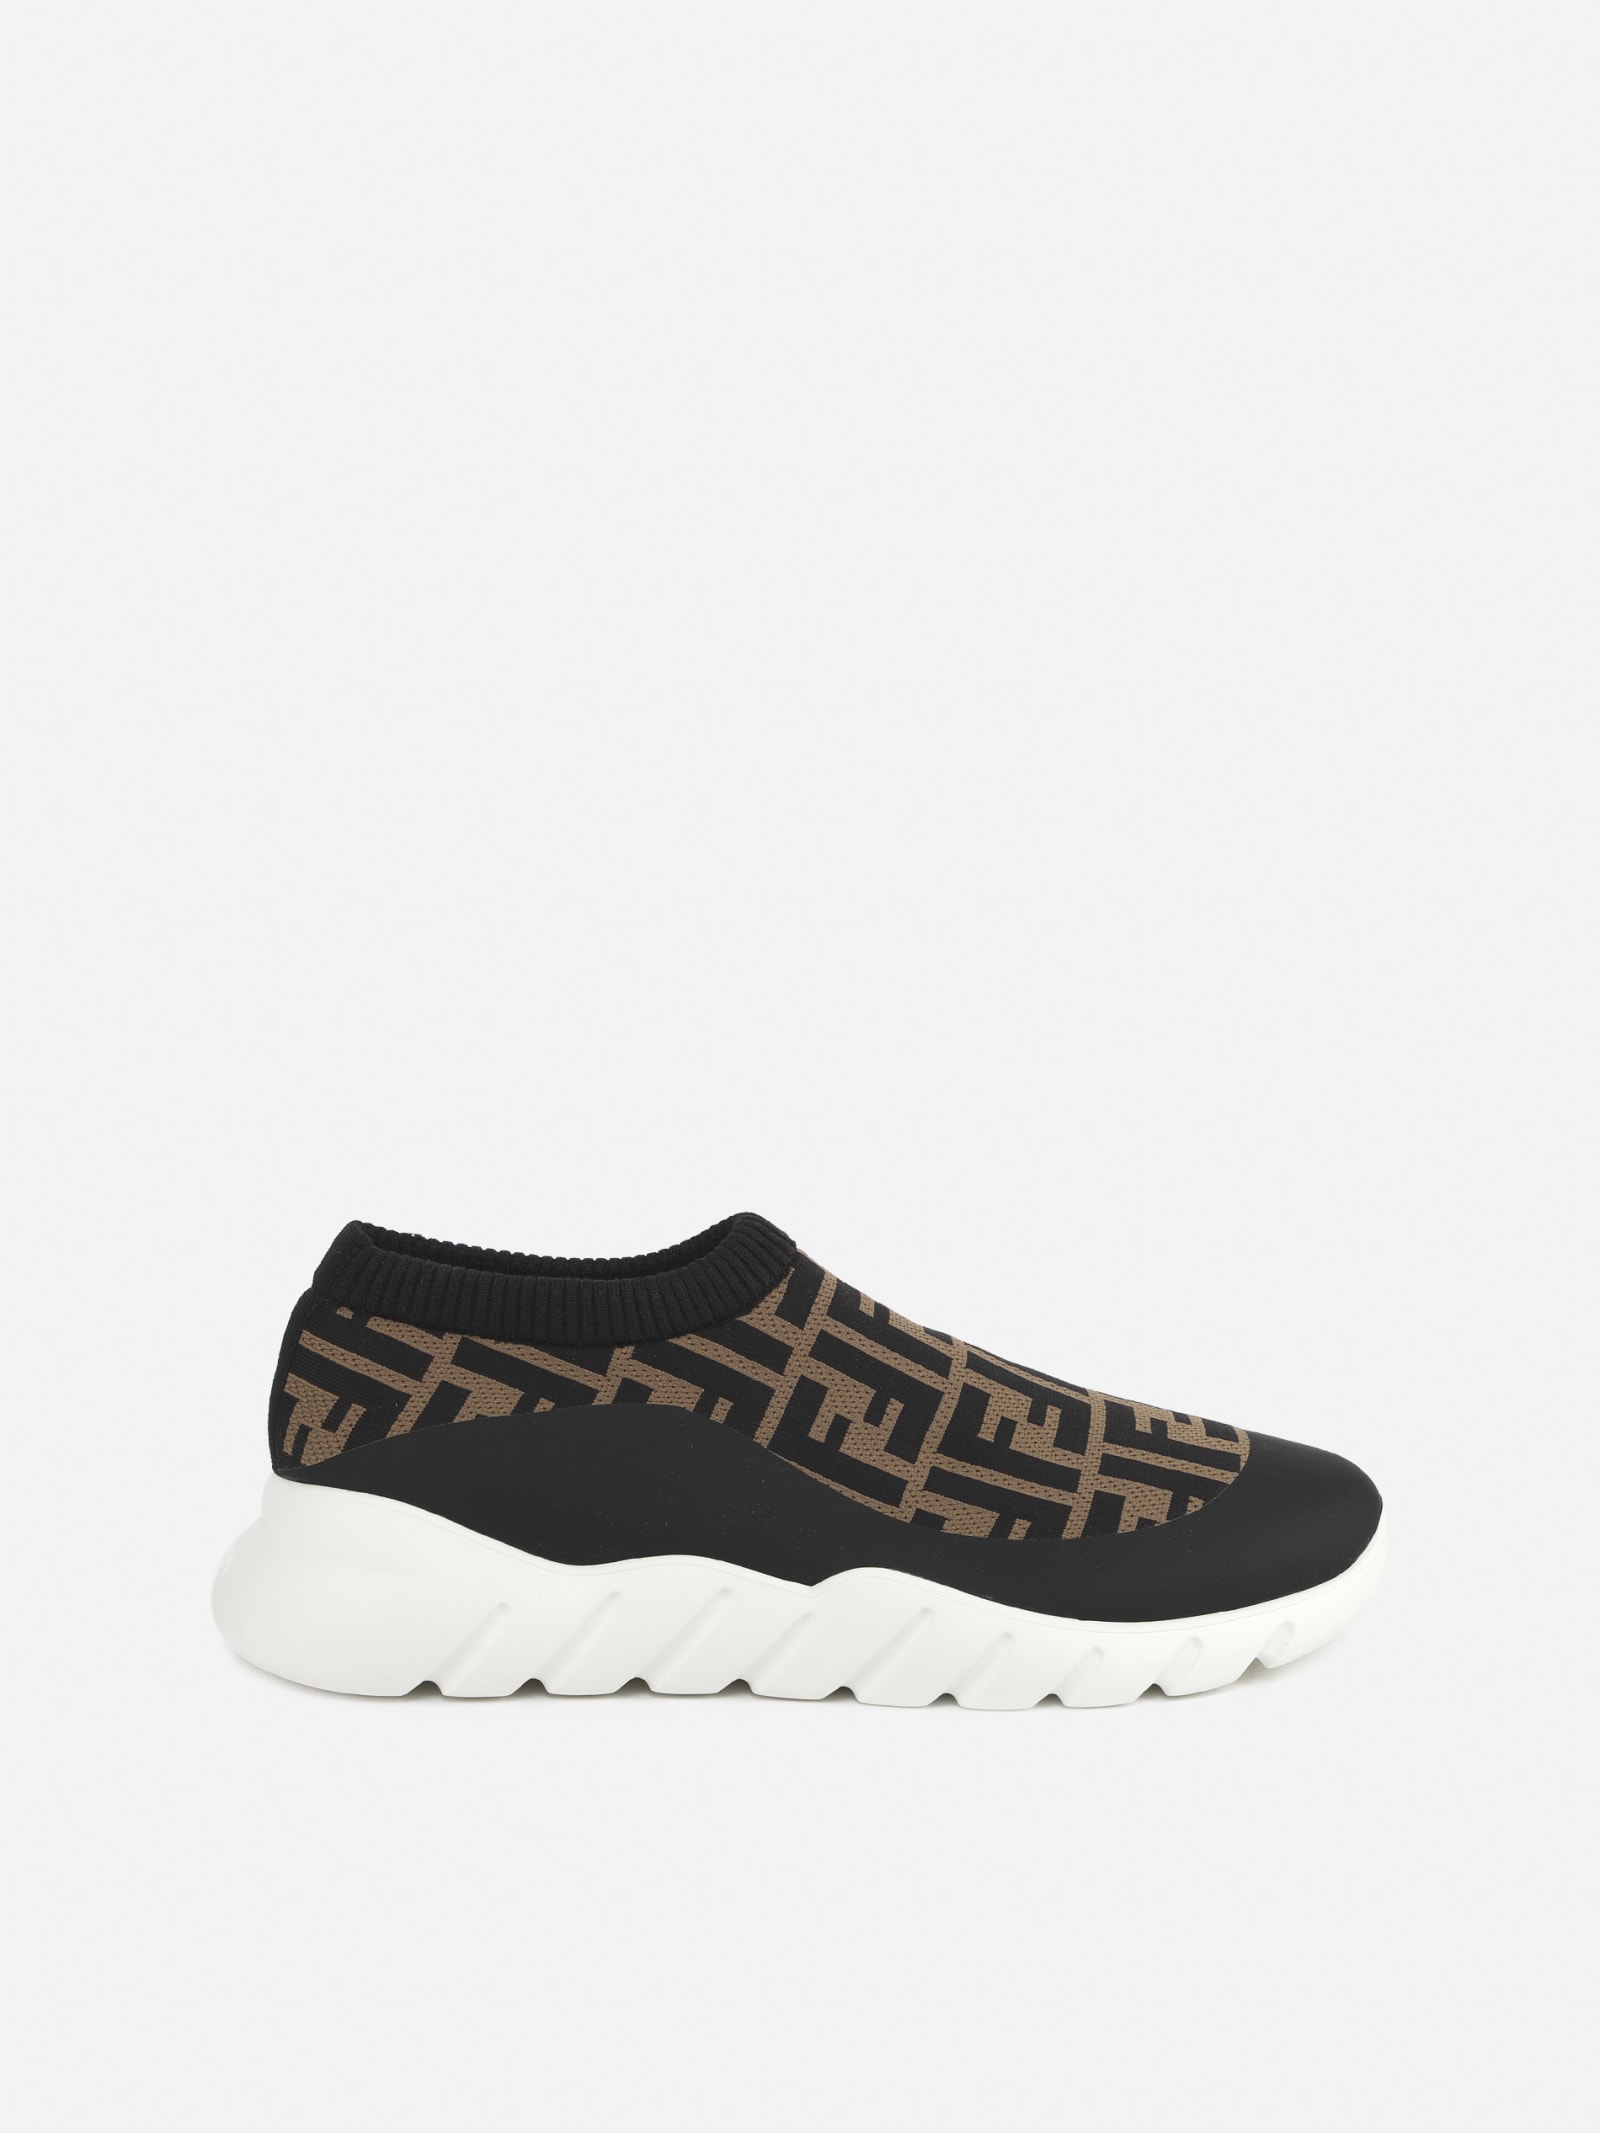 Fendi Knitted Slip On Sneakers With Ff Motif